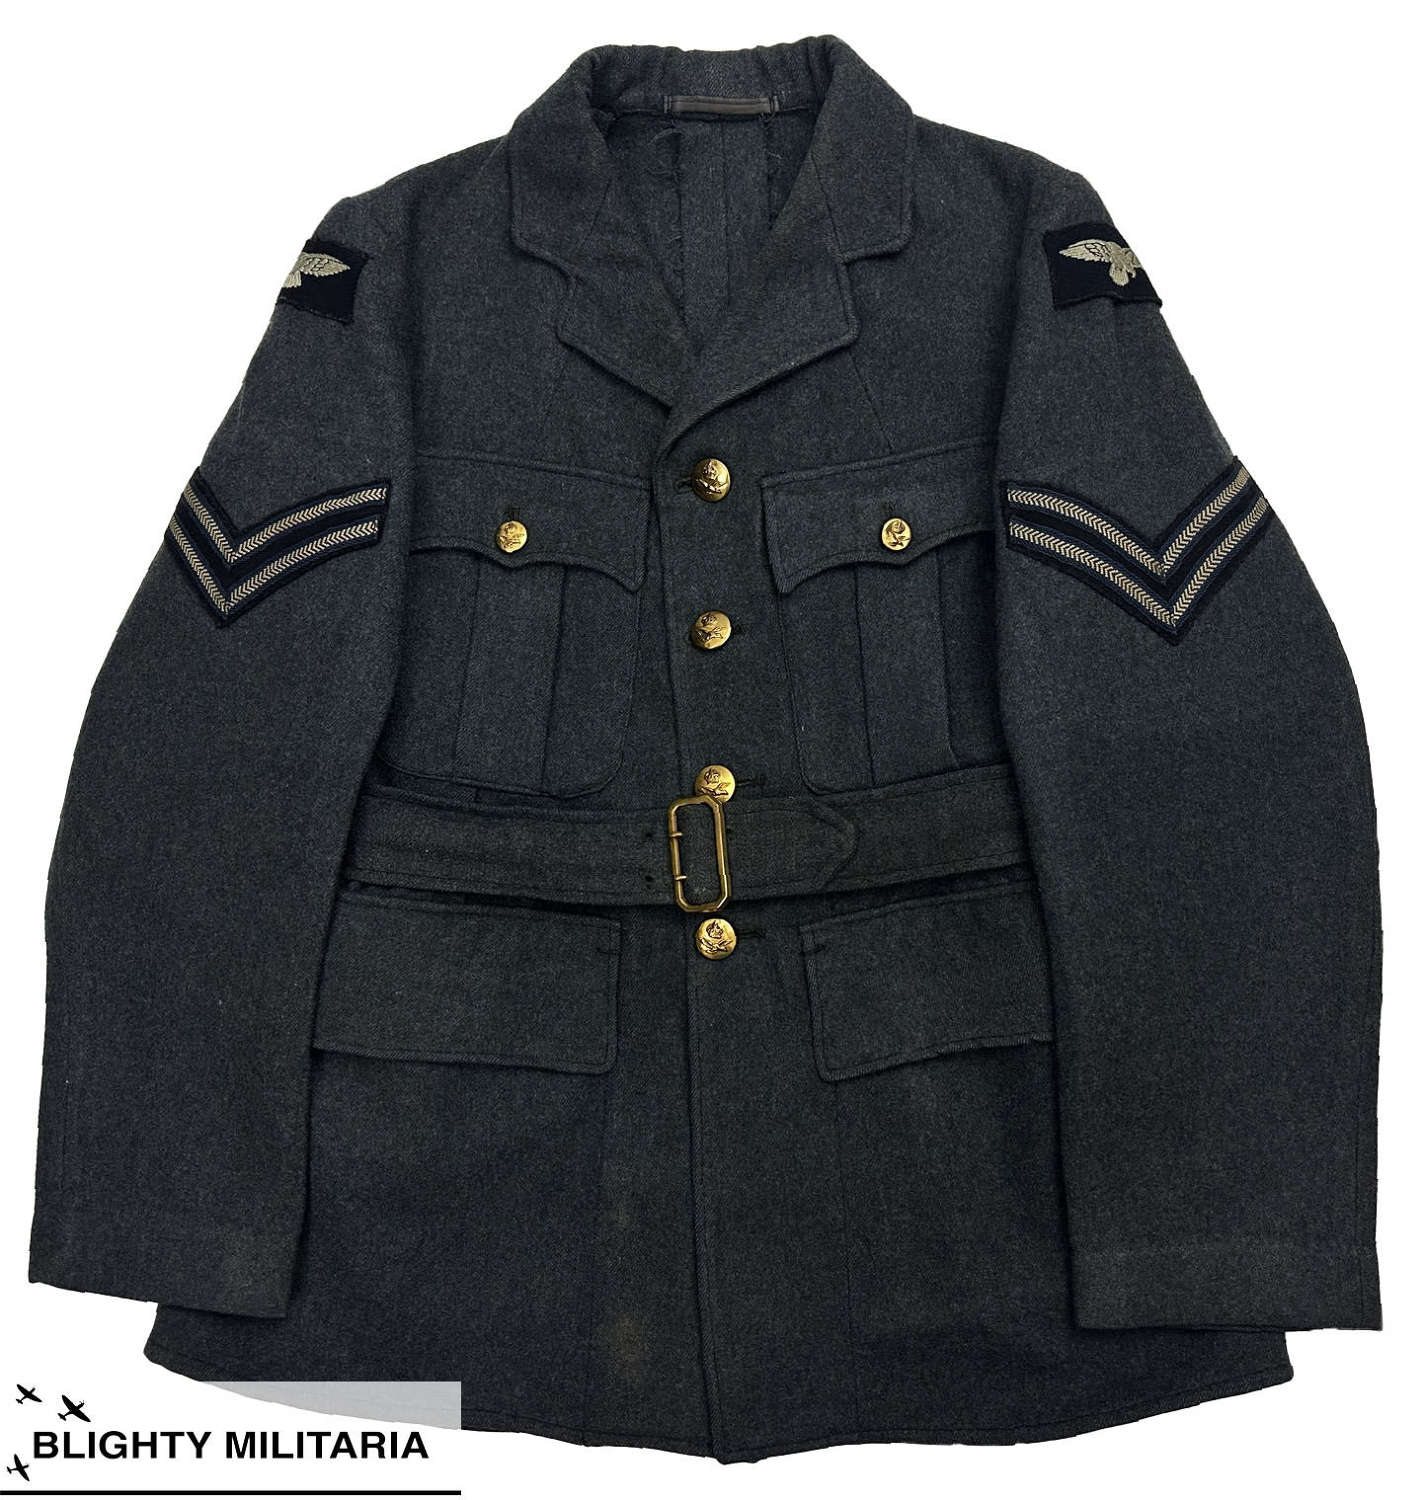 Original Attributed 1940 Dated RAF Ordinary Airman's Tunic - Size 5